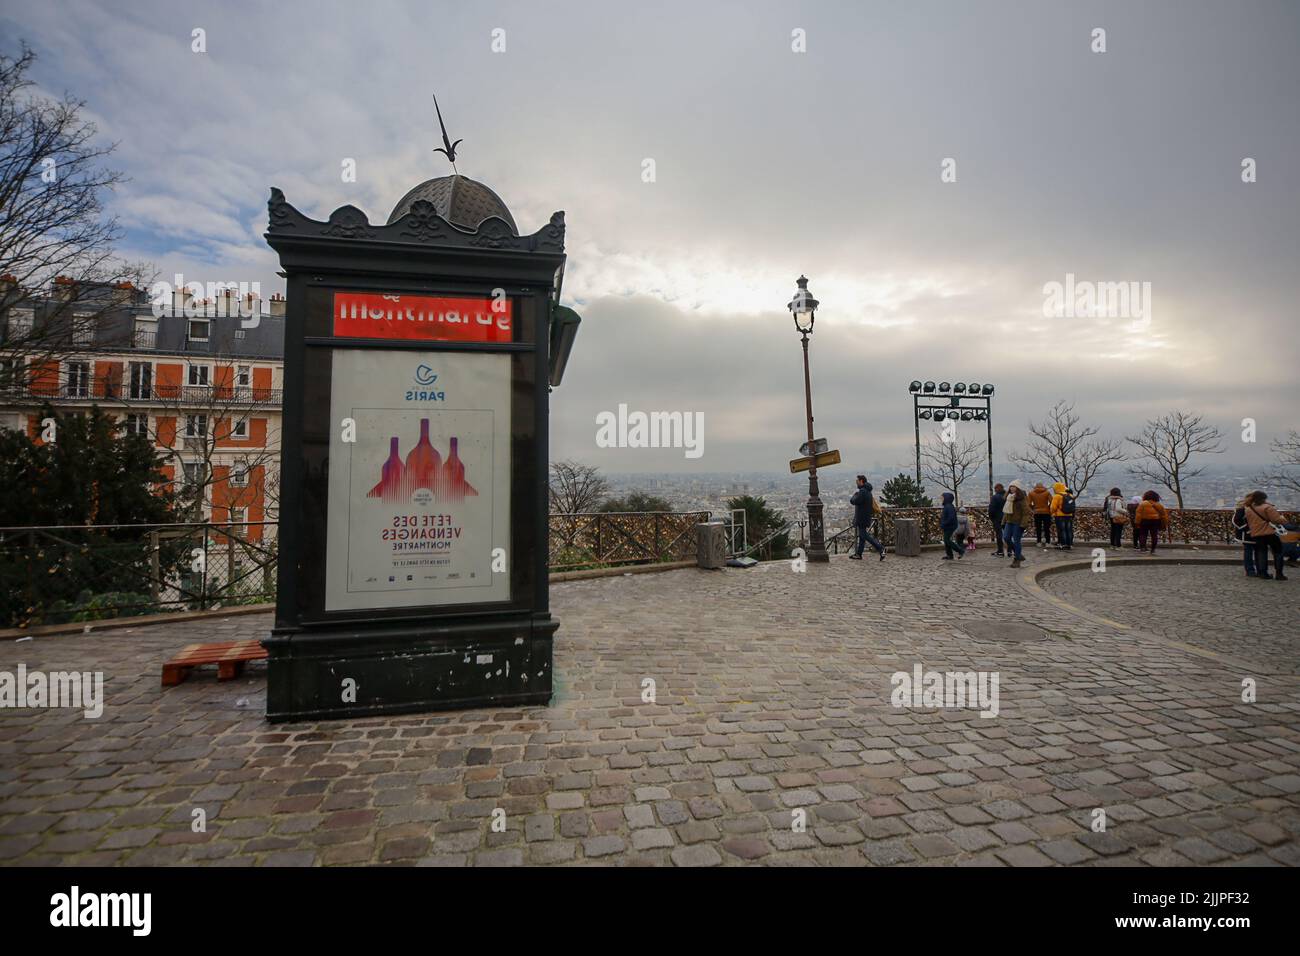 An advertising column in Paris, France, on a cloudy day Stock Photo